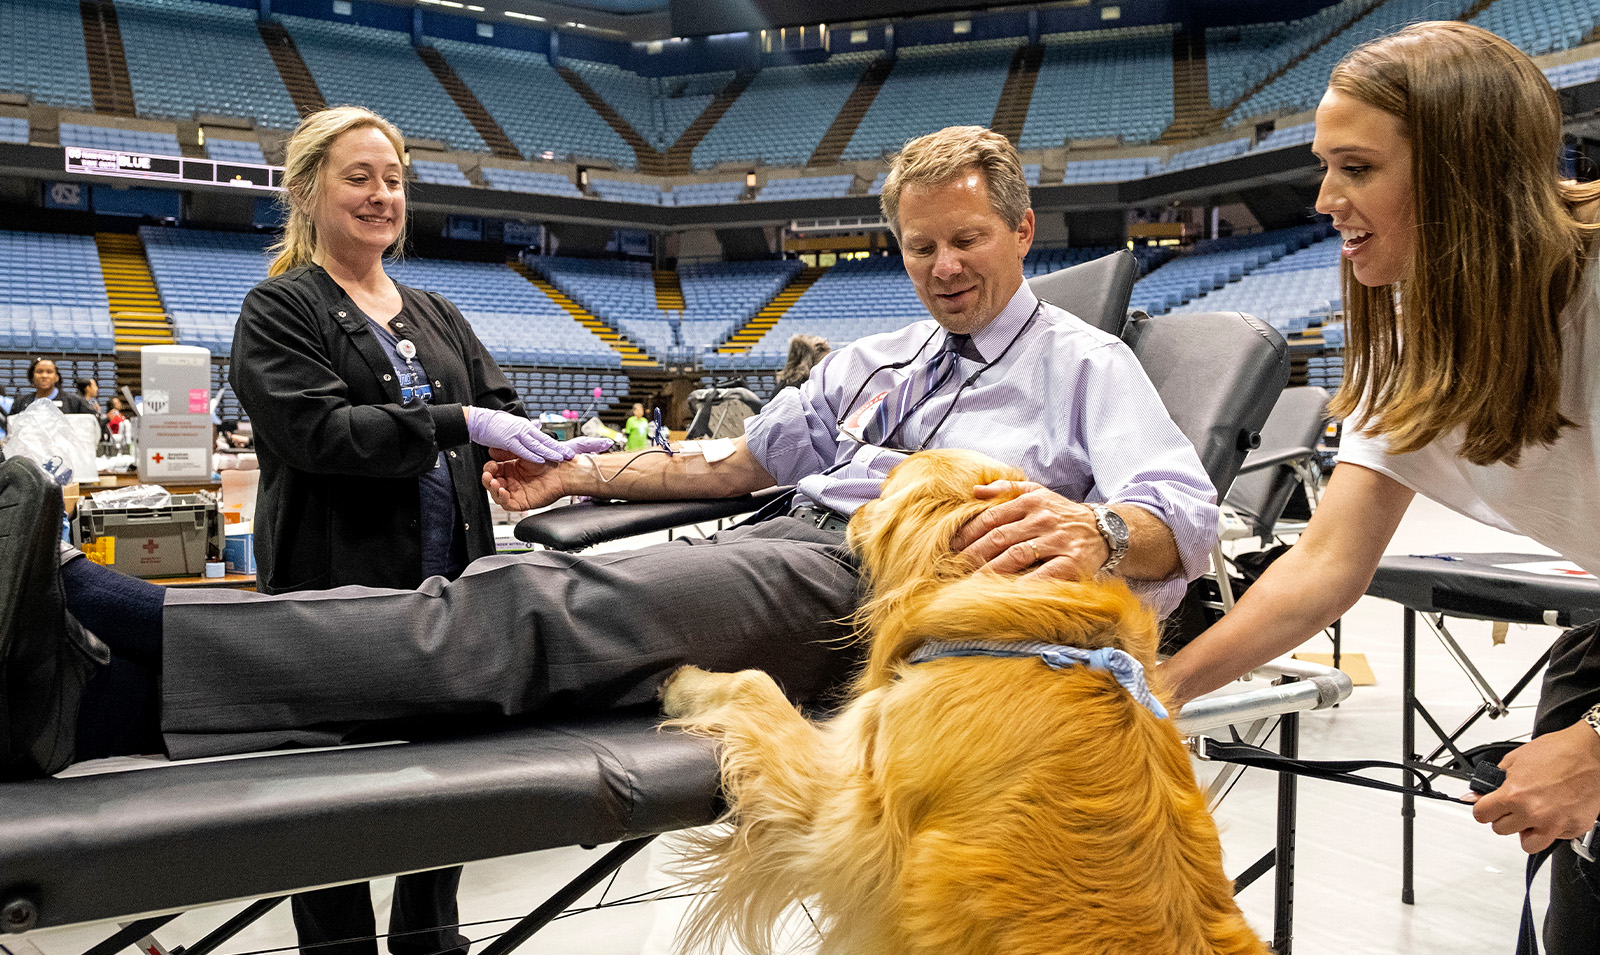 Chancellor Kevin M. Guskiewicz petting a dog while giving blood in the Dean E. Smith Center on the campus of UNC-Chapel Hill.